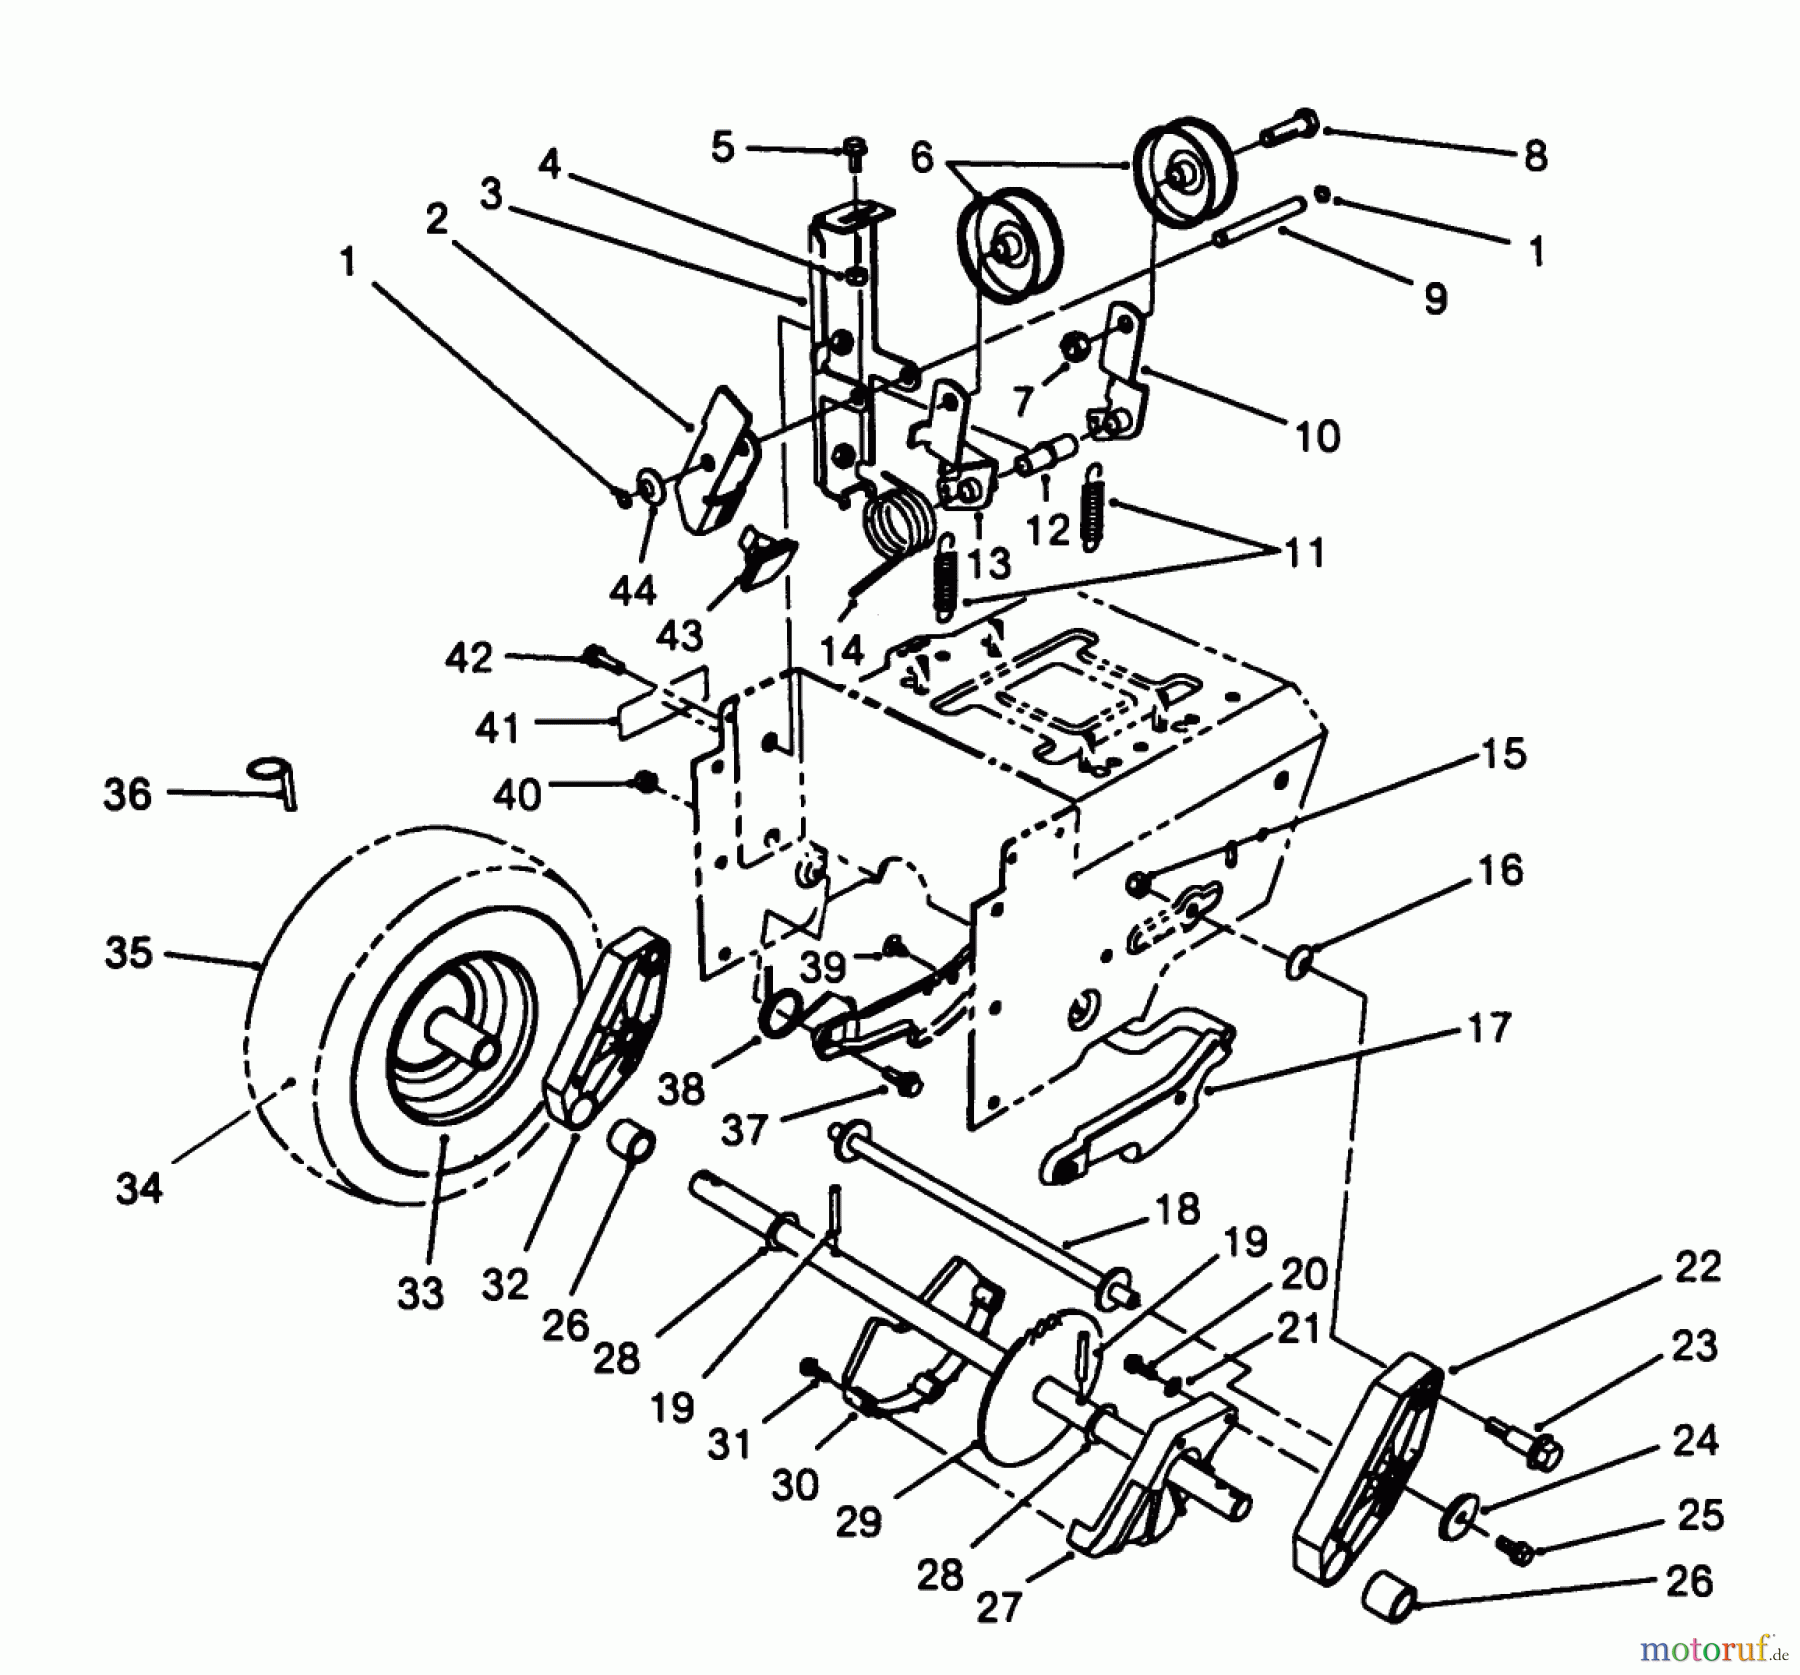  Toro Neu Snow Blowers/Snow Throwers Seite 1 38540 (824) - Toro 824 Power Shift Snowthrower, 1988 (8000001-8999999) TRACTION DRIVE ASSEMBLY